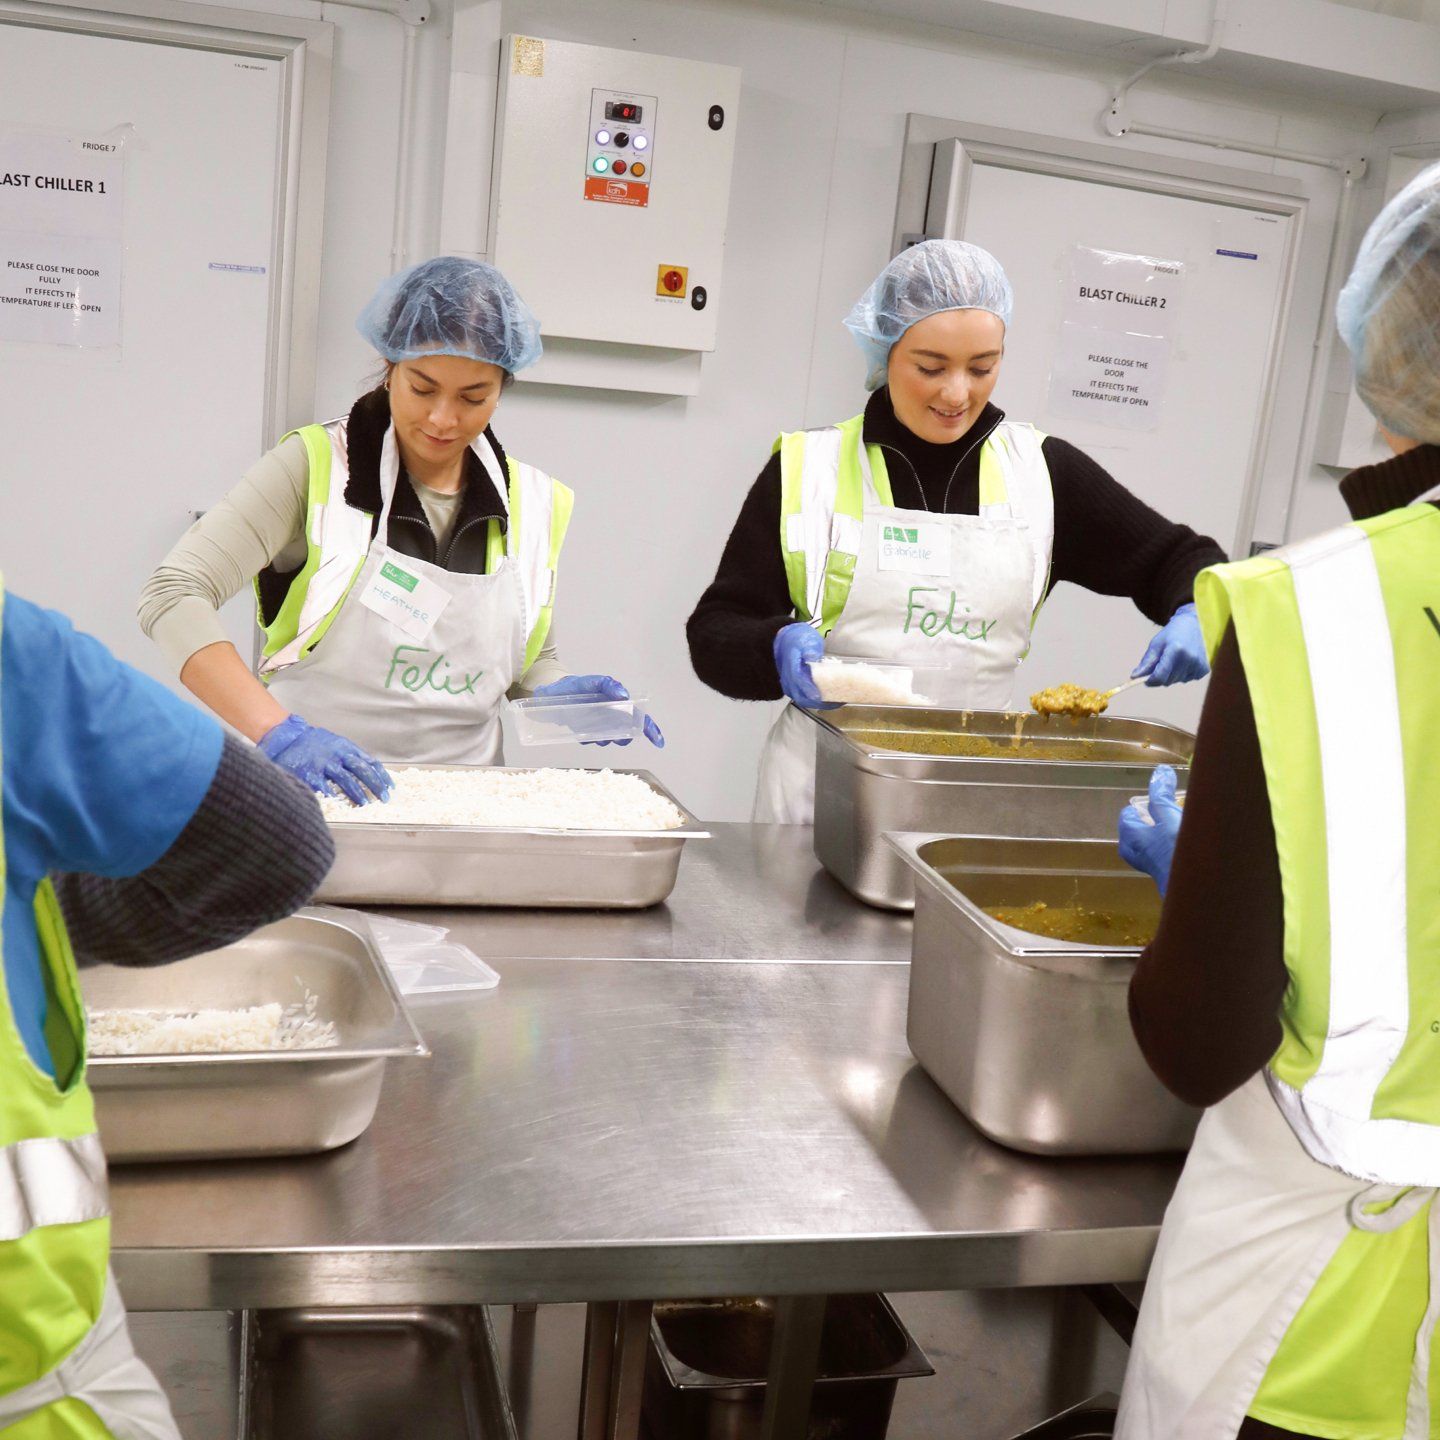 Volunteers working packaging food at the Felix Project charity